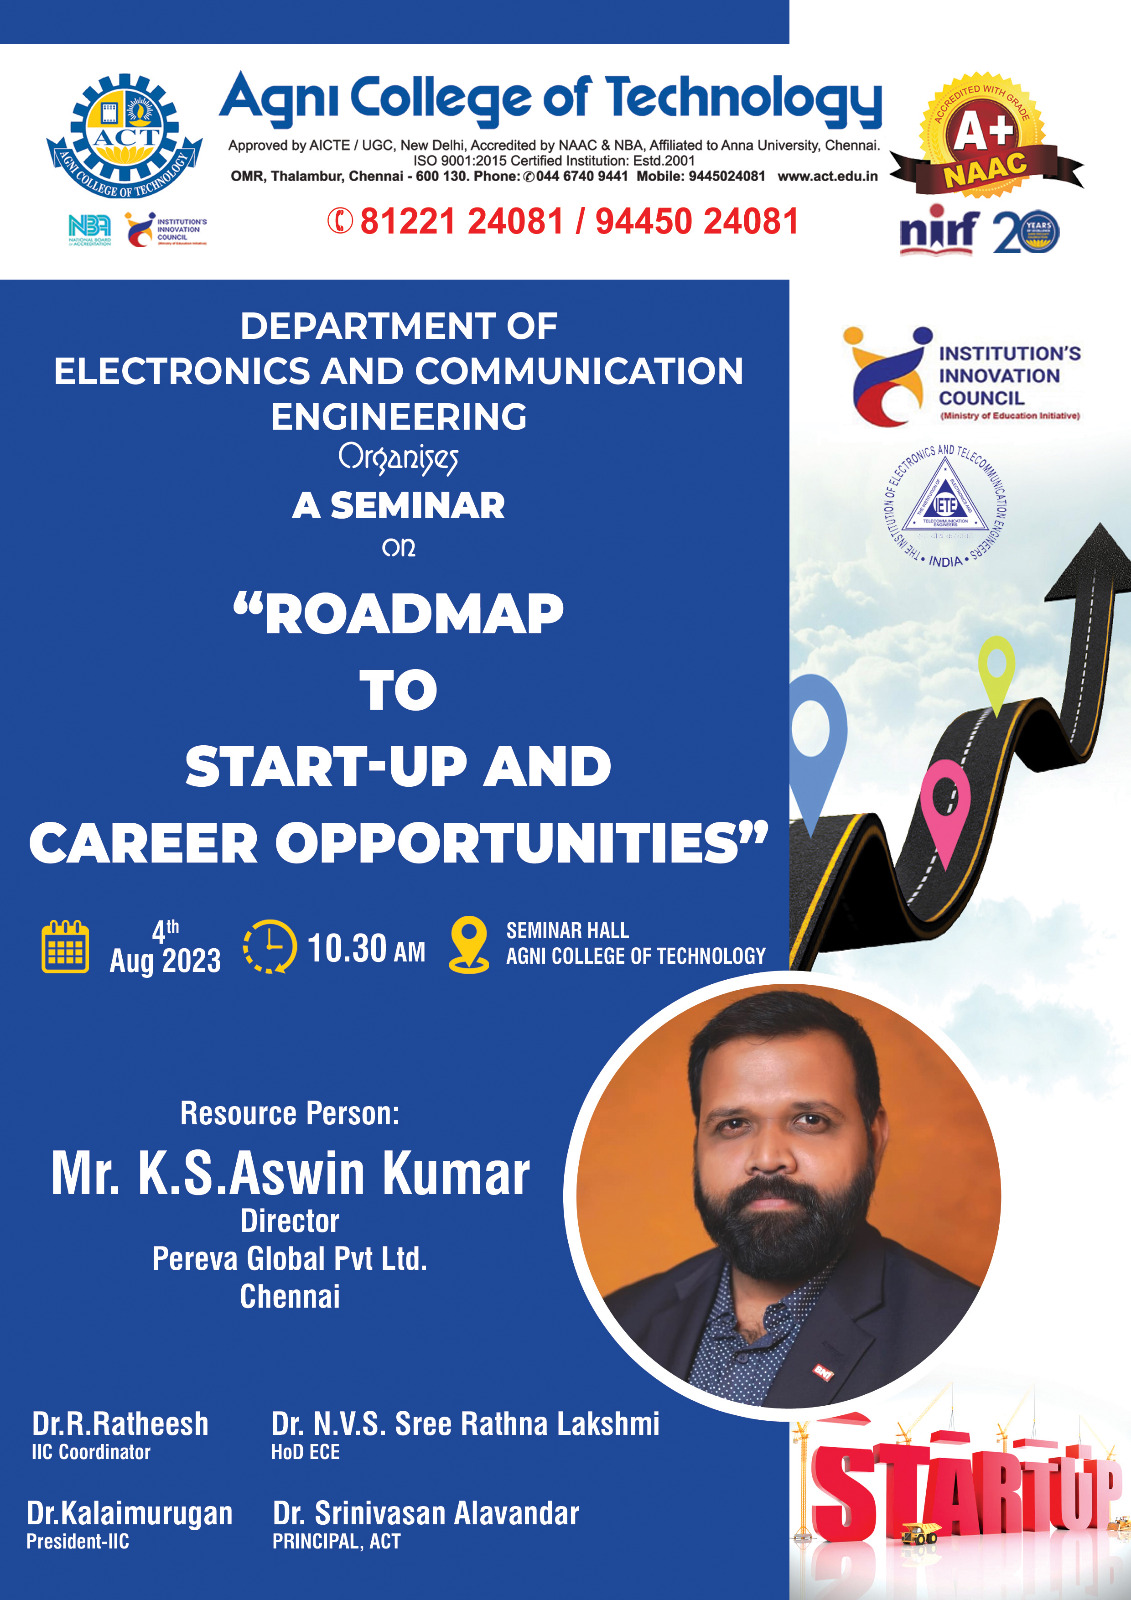 A Seminar on Roadmap to Start-Up and Career Opportunities